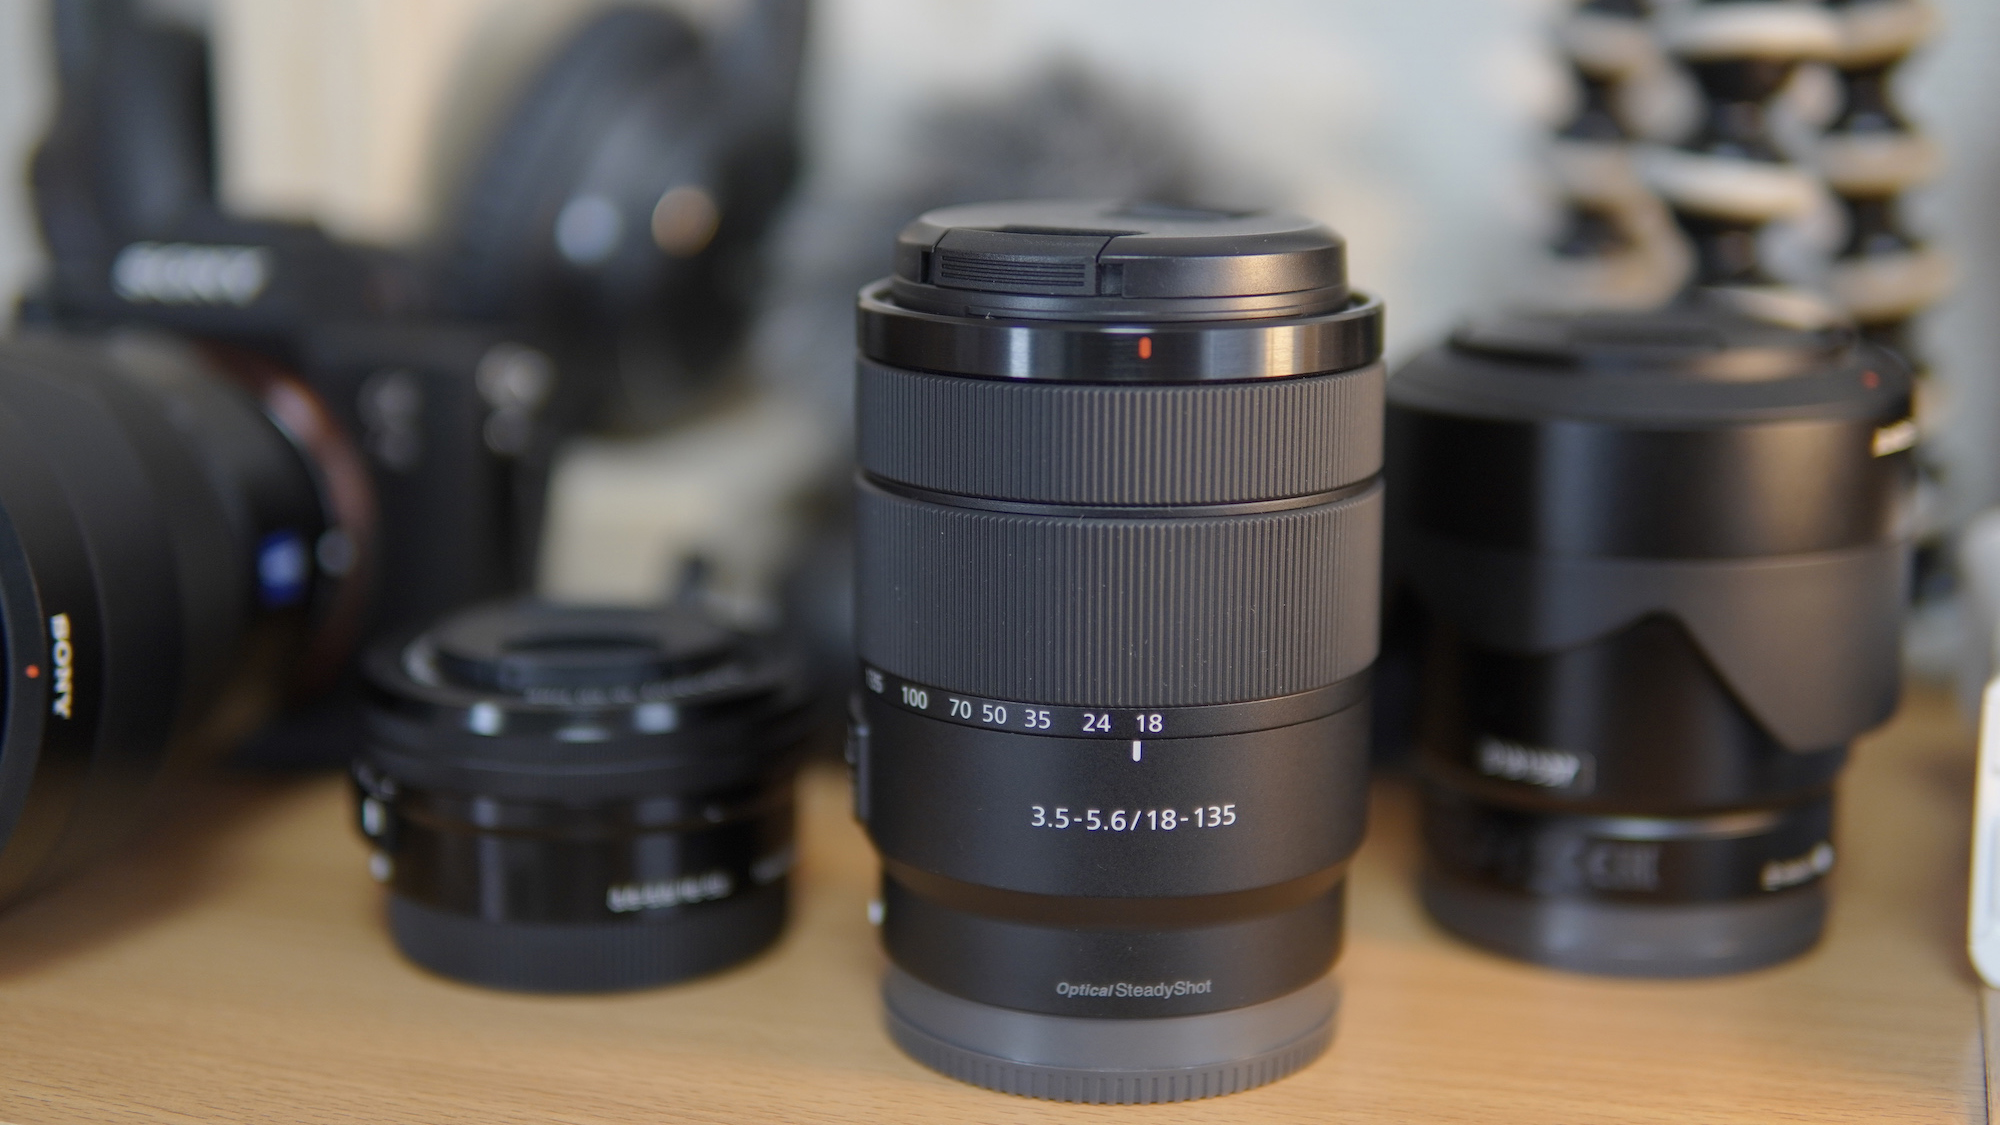 Why I Chose Sony E 18-135mm F3.5-F5.6 Instead of 18-105mm F4